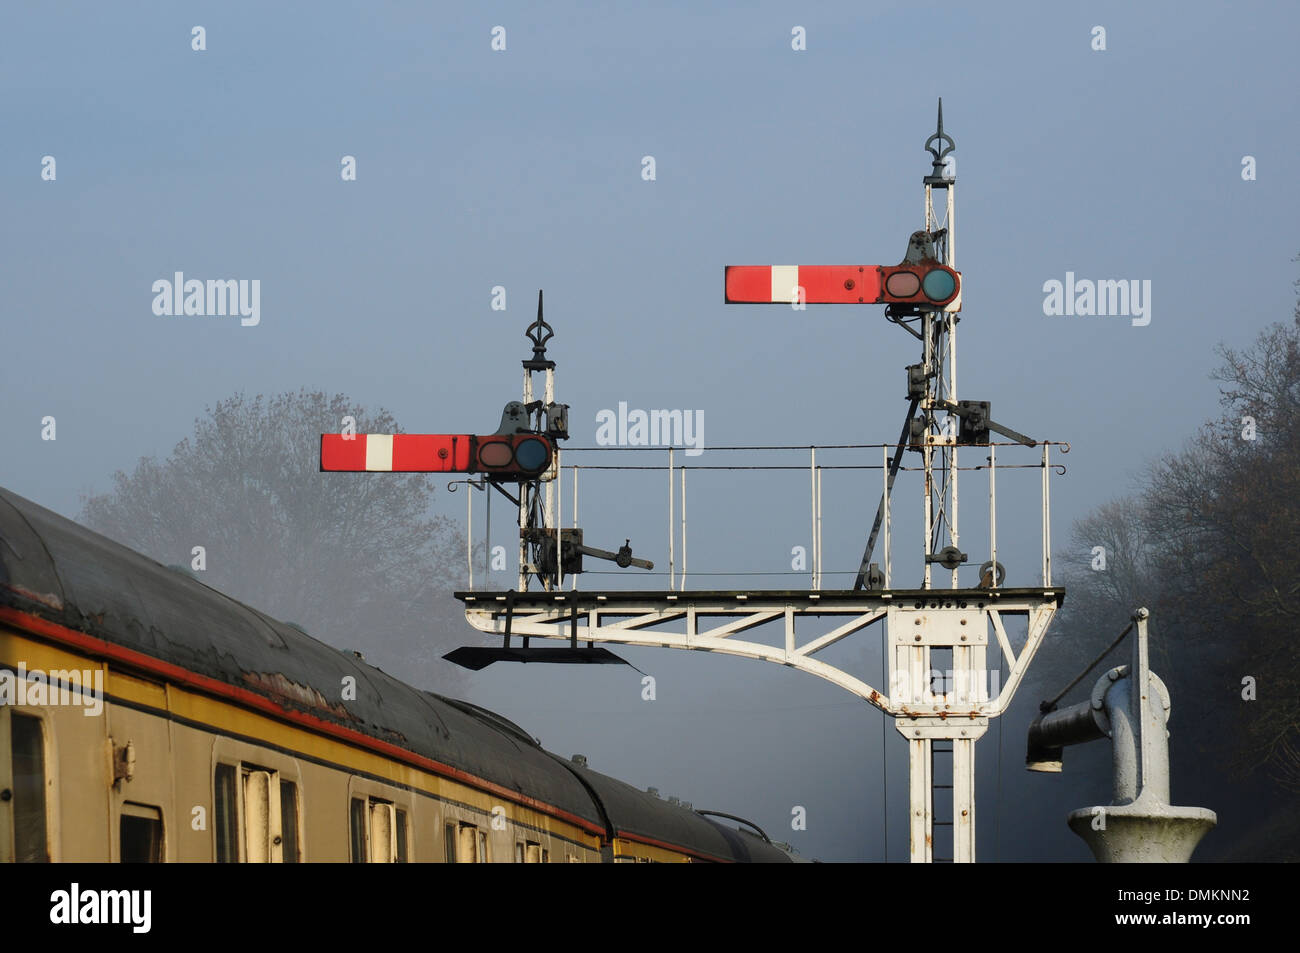 Semaphore signals and winter mist at Horsted Keynes station on the Bluebell Railway, Sussex, England, UK Stock Photo